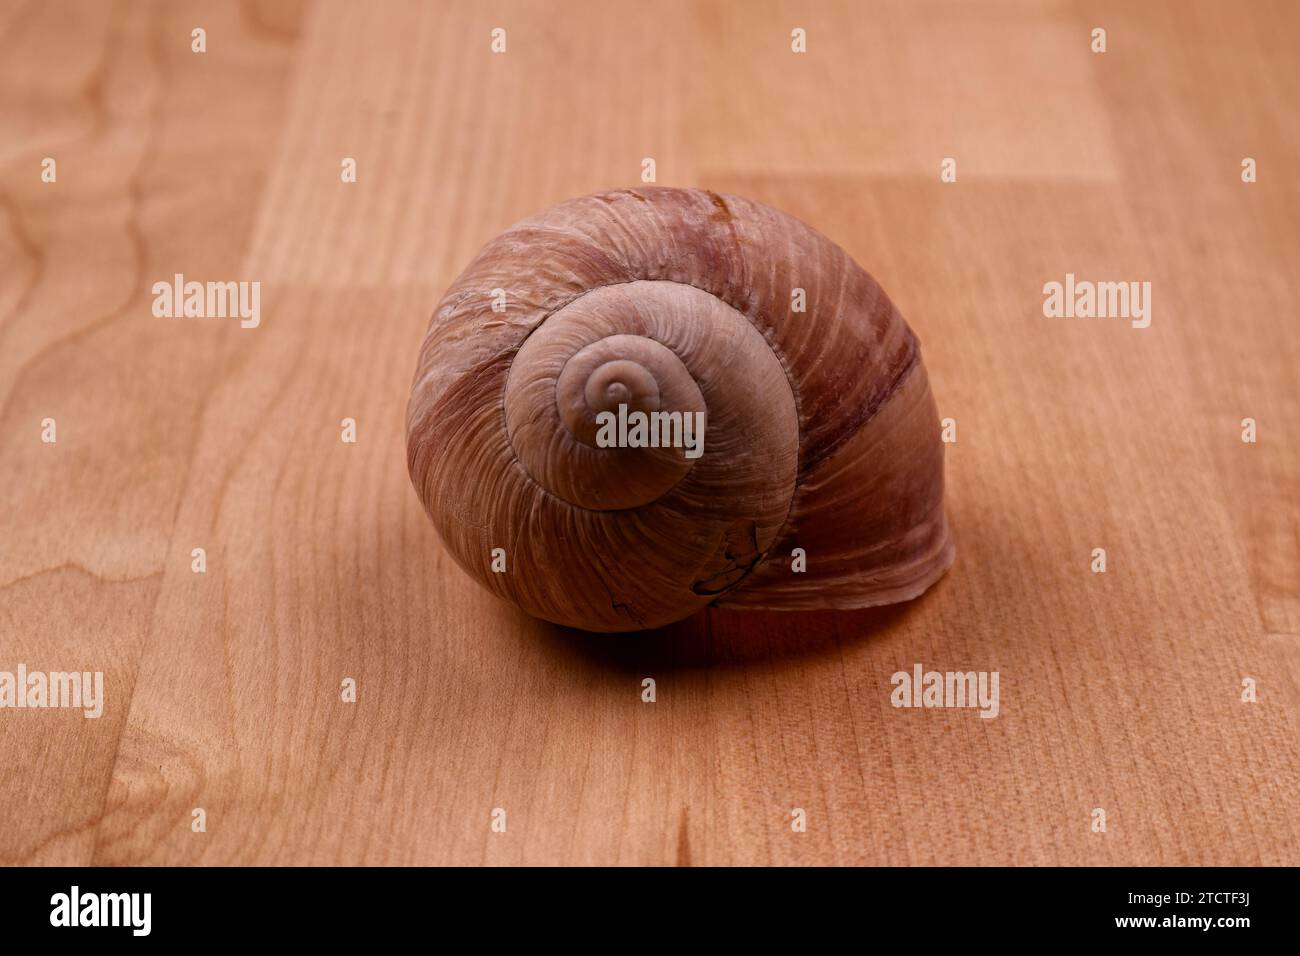 a shimmering snail shell lying on a wooden table, close up image Stock Photo